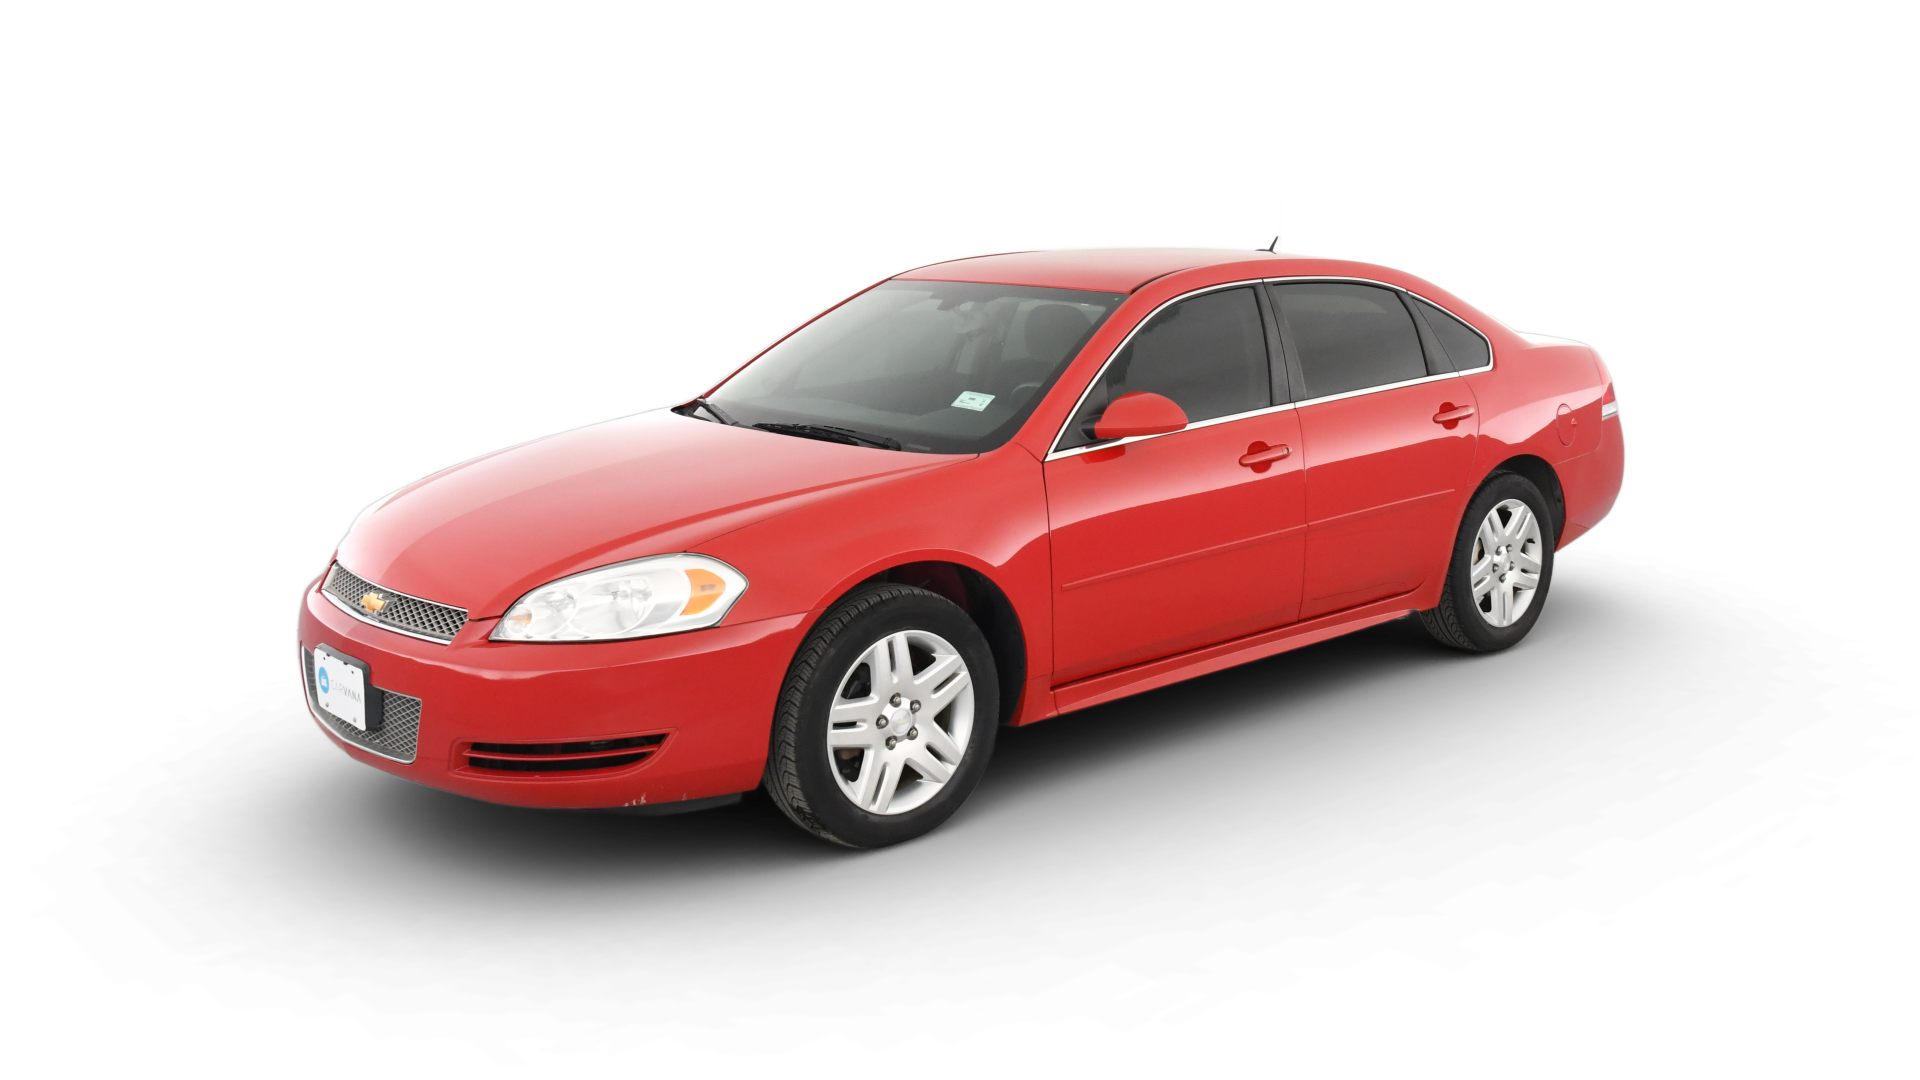 Used 2013 Chevrolet Impala For Sale Online | Carvana